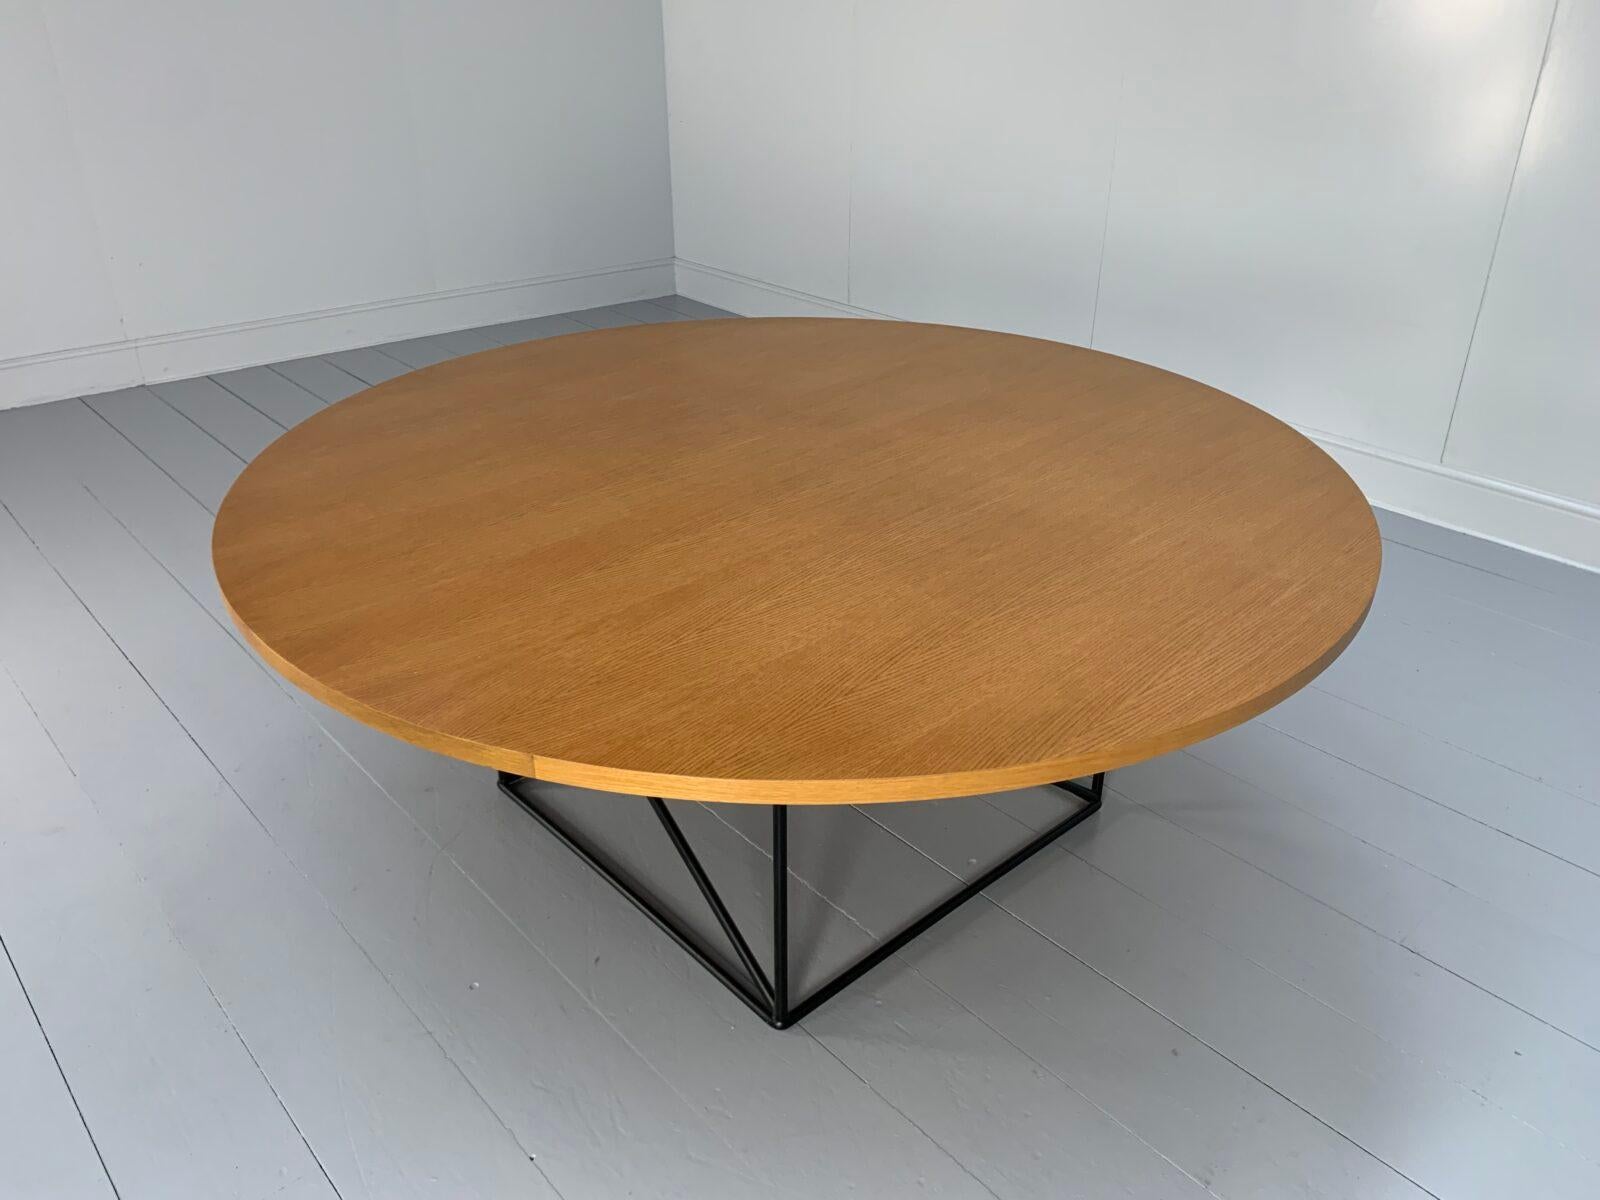 Cassina Le Corbusier “LC15” Round Circular Dining Table – In Natural Oak In Good Condition In Barrowford, GB